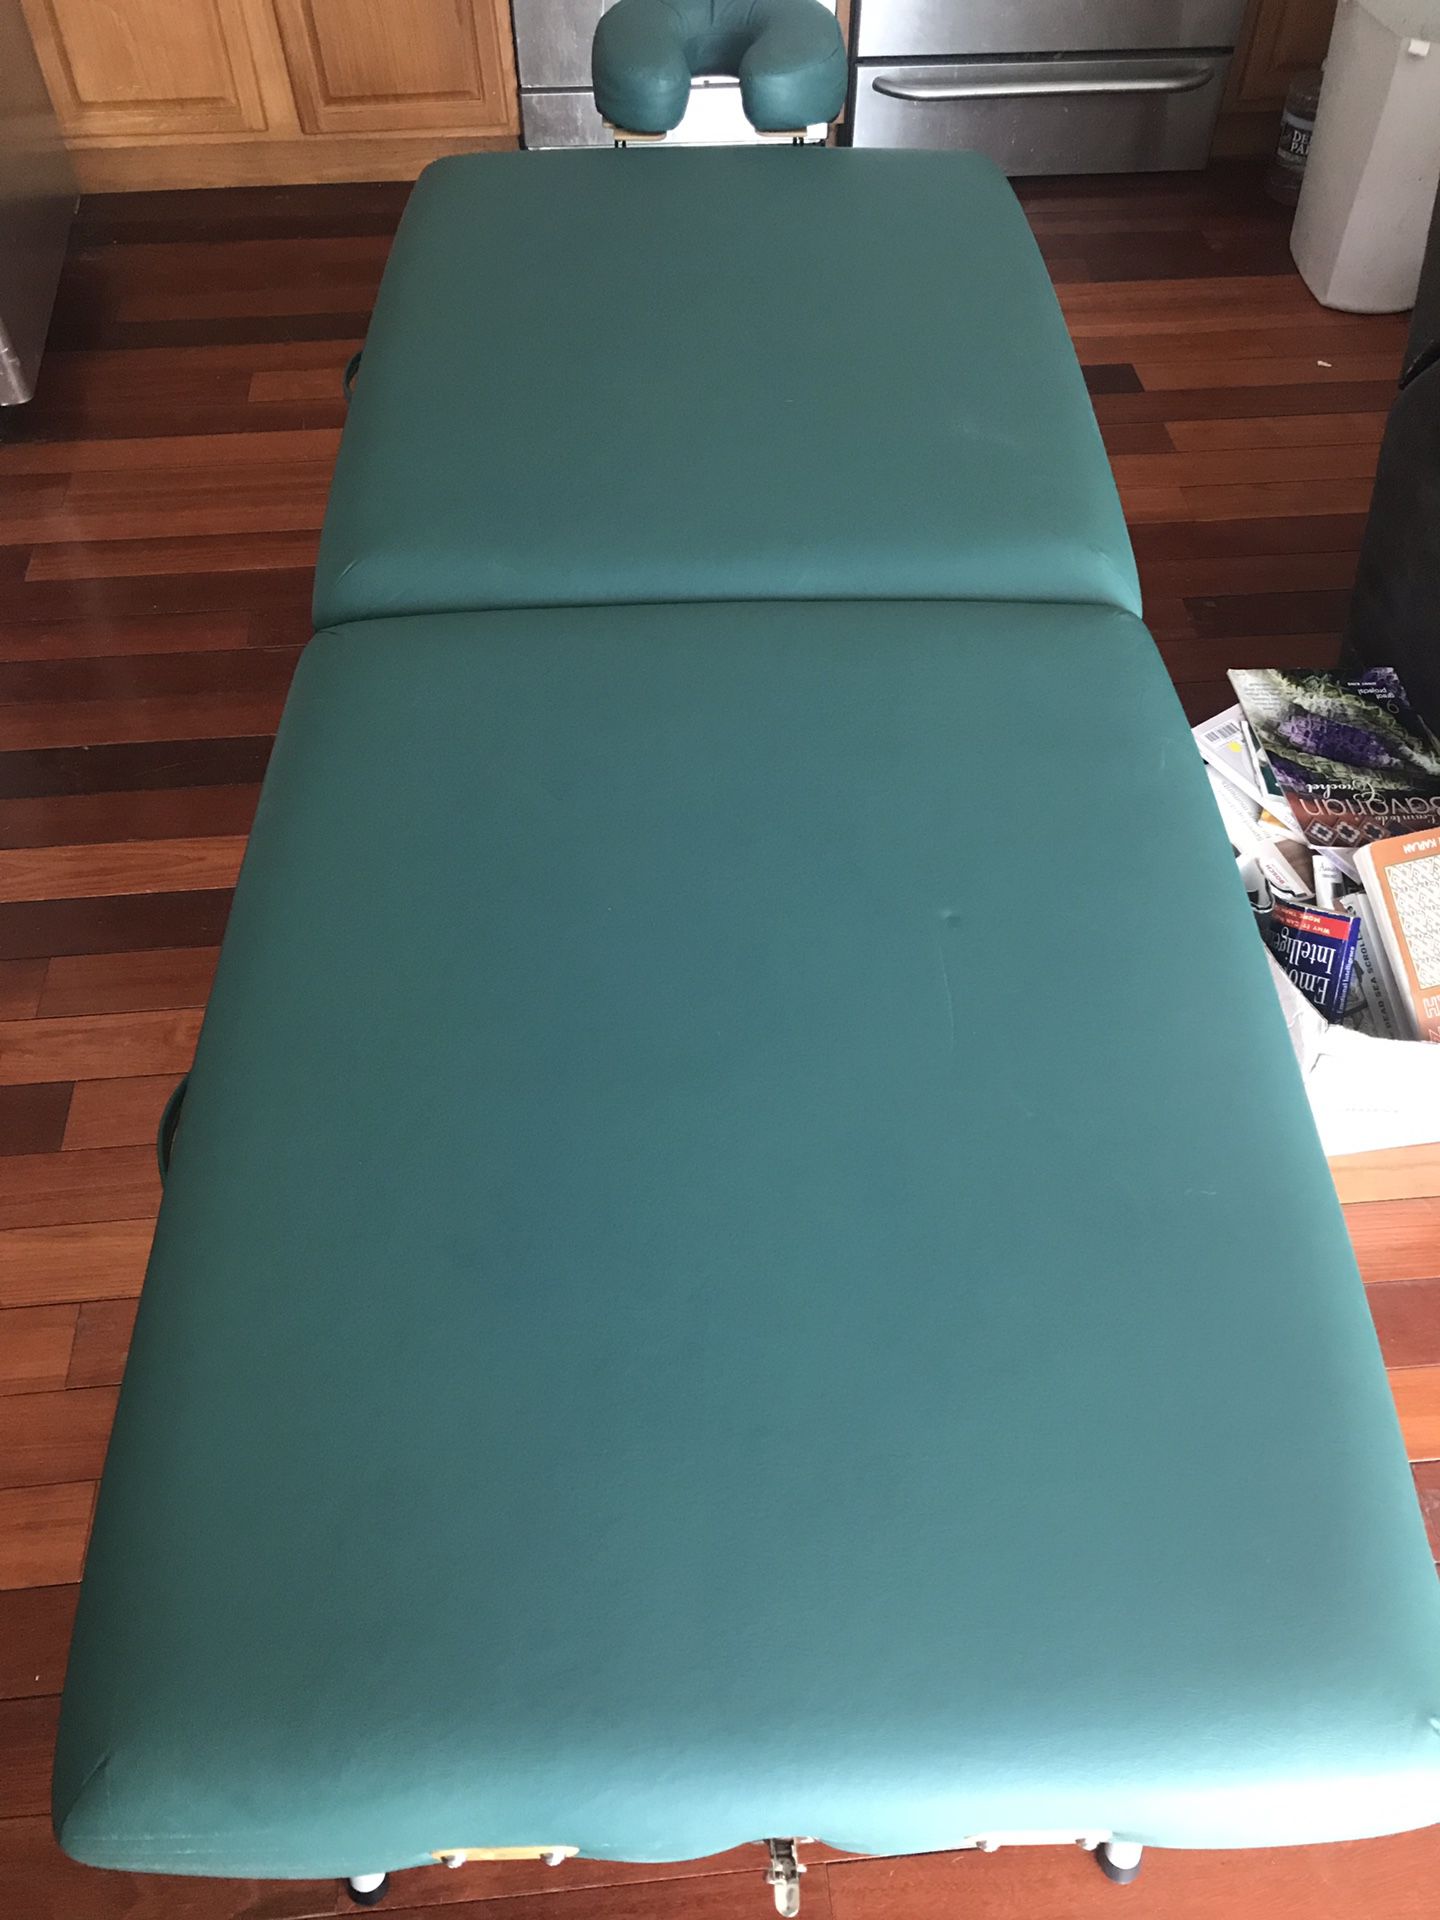 New EarthLink massage table